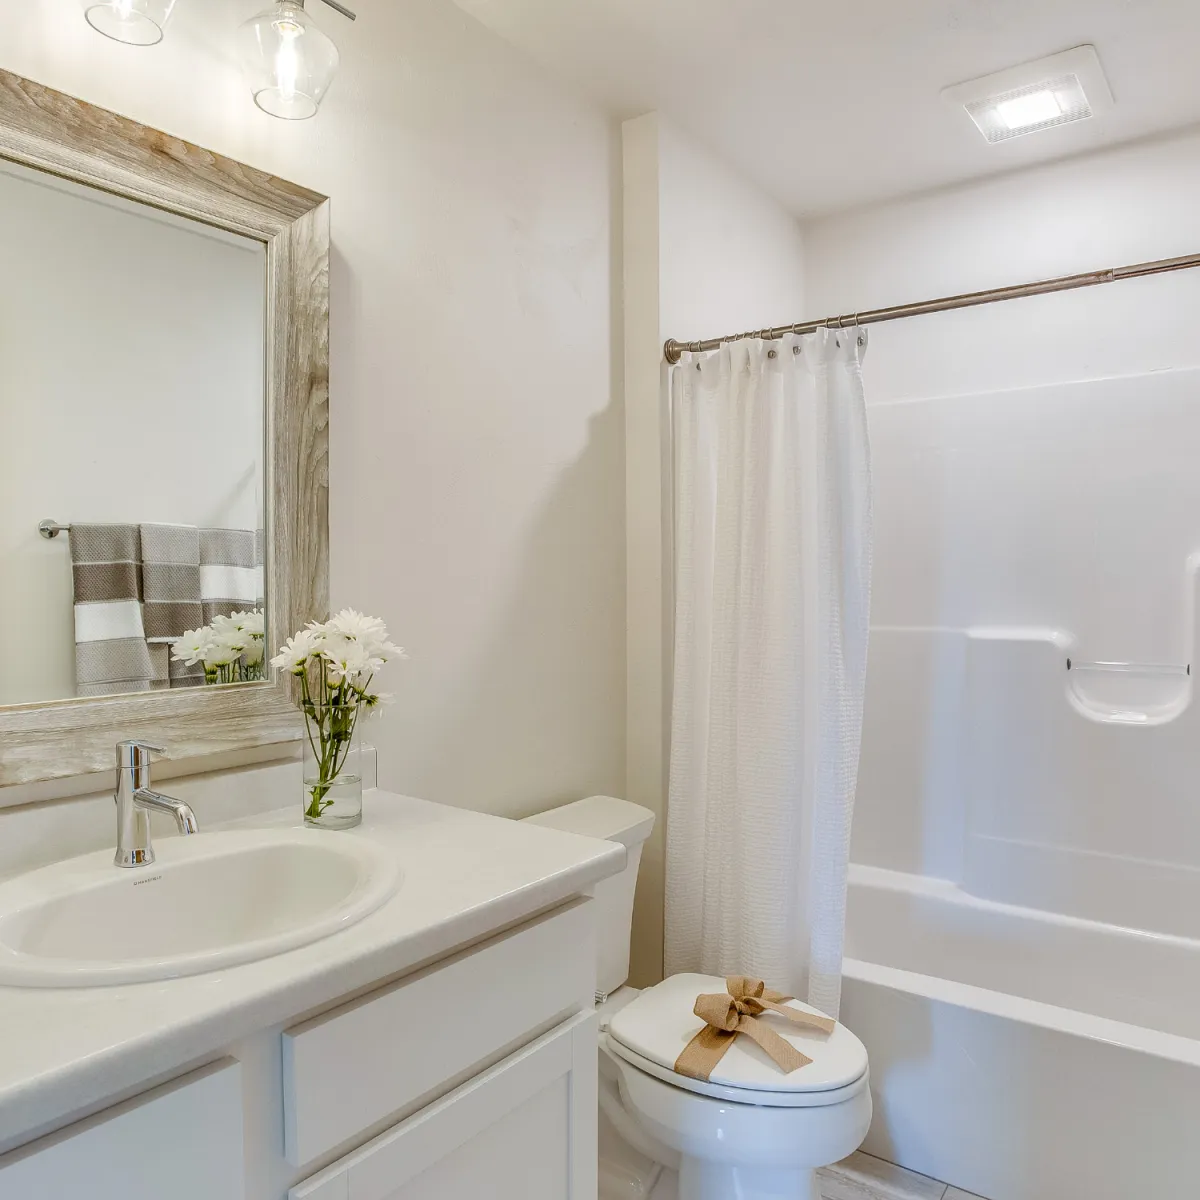 Expert Bathroom Remodel by Hand in Hand Contracting, Dallas Fort Worth Texas